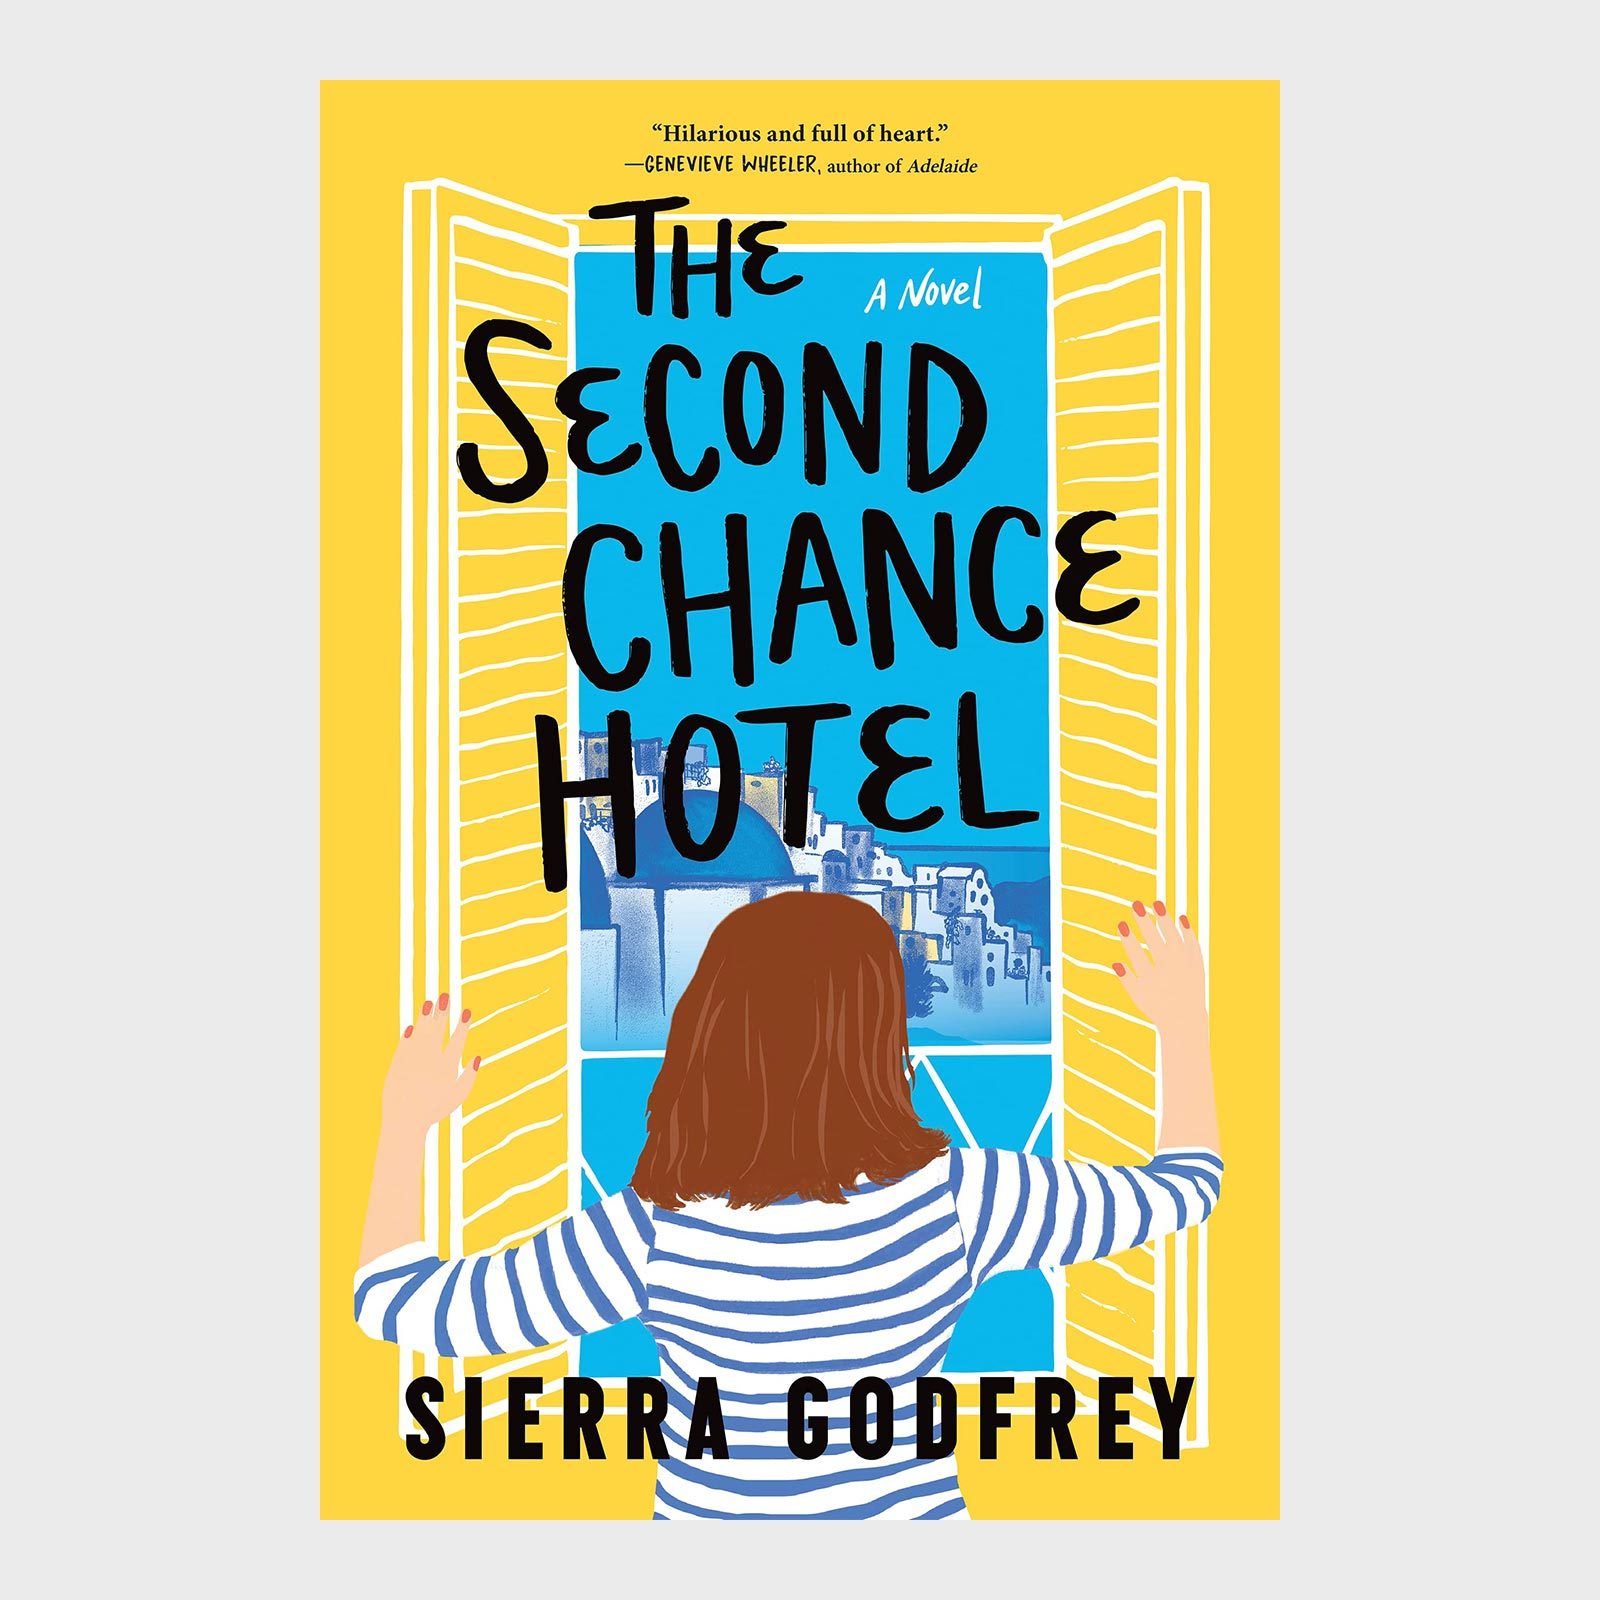 <h3><em>The Second Chance Hotel </em>by Sierra Godfrey</h3> <p><strong>Setting:</strong> The fictional Greek island of Astori</p> <p>After getting fired from her corporate job and skipping out on her best friend's wedding, Amelia Lang needs a major life do-over. She's well aware of it, but she didn't expect it to come in the form of inheriting a hotel on a small Greek island. She also didn't expect to be physically attracted to one of the guests. <a href="https://www.amazon.com/Second-Chance-Hotel-Novel/dp/1728284562" rel="noopener noreferrer"><em>The Second Chance Hotel</em></a> (September 2023) is a lighthearted <a href="https://www.rd.com/list/best-romance-novels-of-all-time/" rel="noopener noreferrer">romance</a> at heart. It's also a great travel book, thanks to its incredible descriptions of Greek island living, from the sun-ripened olives to the delicious gulps of sea air.</p> <p class="listicle-page__cta-button-shop"><a class="shop-btn" href="https://www.amazon.com/Second-Chance-Hotel-Novel/dp/1728284562">Shop Now</a></p>